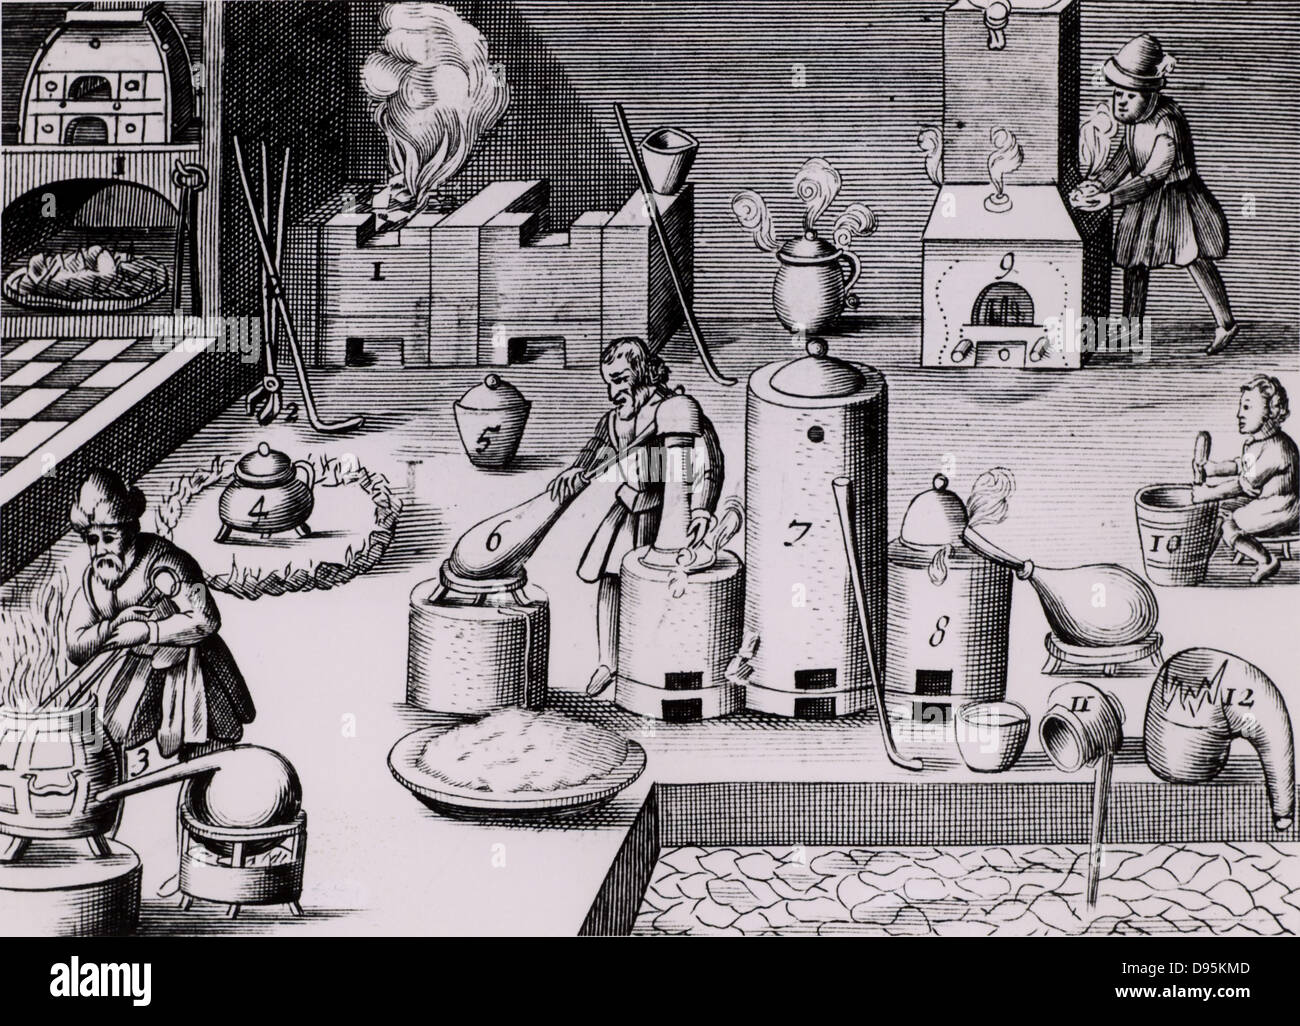 Assay laboratory with various forms of furnace including and athanor or 'Slow Harry', 7, self-stoking furnace for cementation, 9, and barrel-shaped furnace, 3, in which draught supplied by steam from water in container placed over hot charcoals.  At 4 a crucible is being gradually heated in a ring of burning coals: to increase the heat coals could be raked into a smaller circle. From 1683 English edition of Lazarus Ercker  'Beschreibung allerfurnemisten mineralischen Ertzt- und Berckwercksarten' originally published in Prague in 1574. Copperplate engraving. Stock Photo